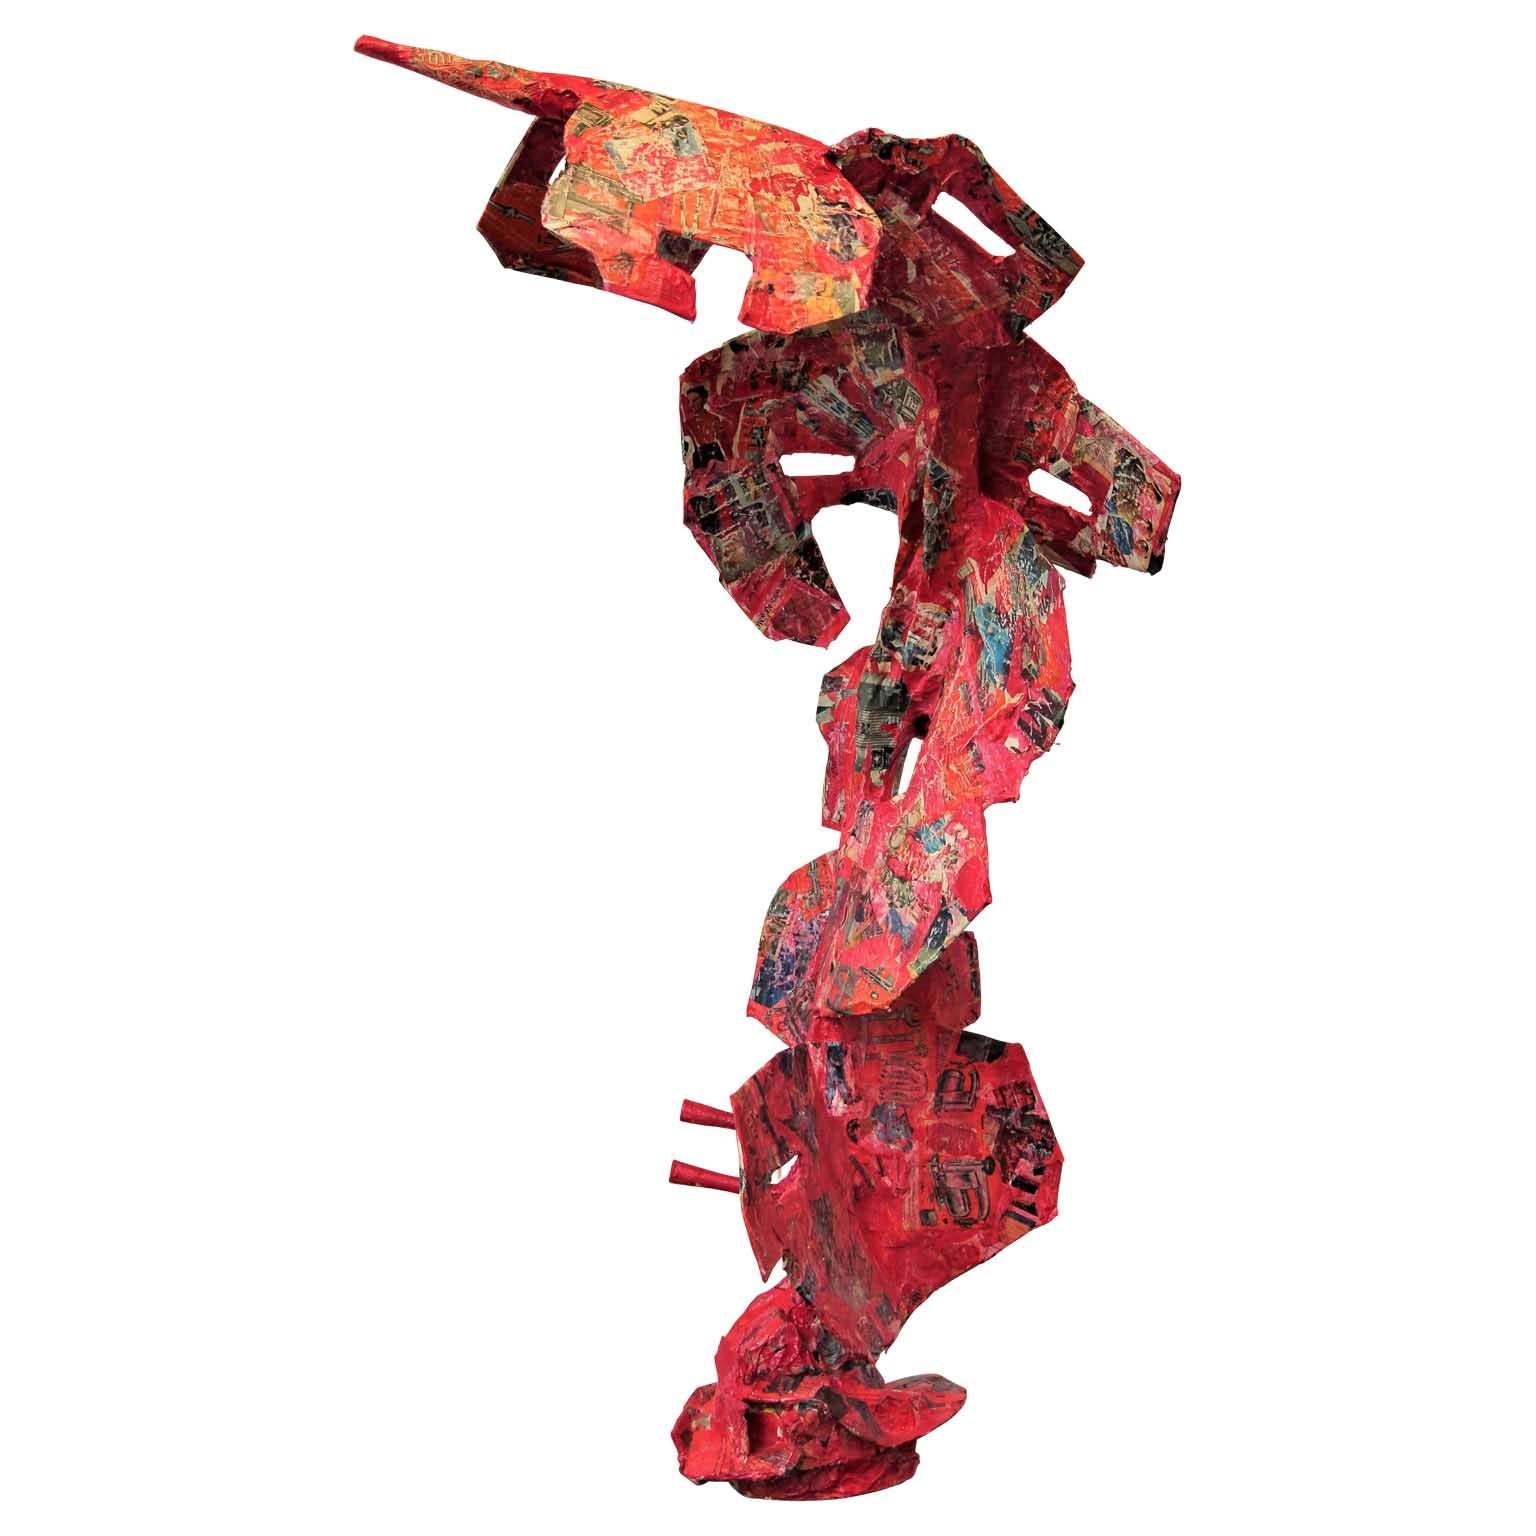 “Culture Counter” Red Abstract Contemporary Mixed Media Collage Sculpture